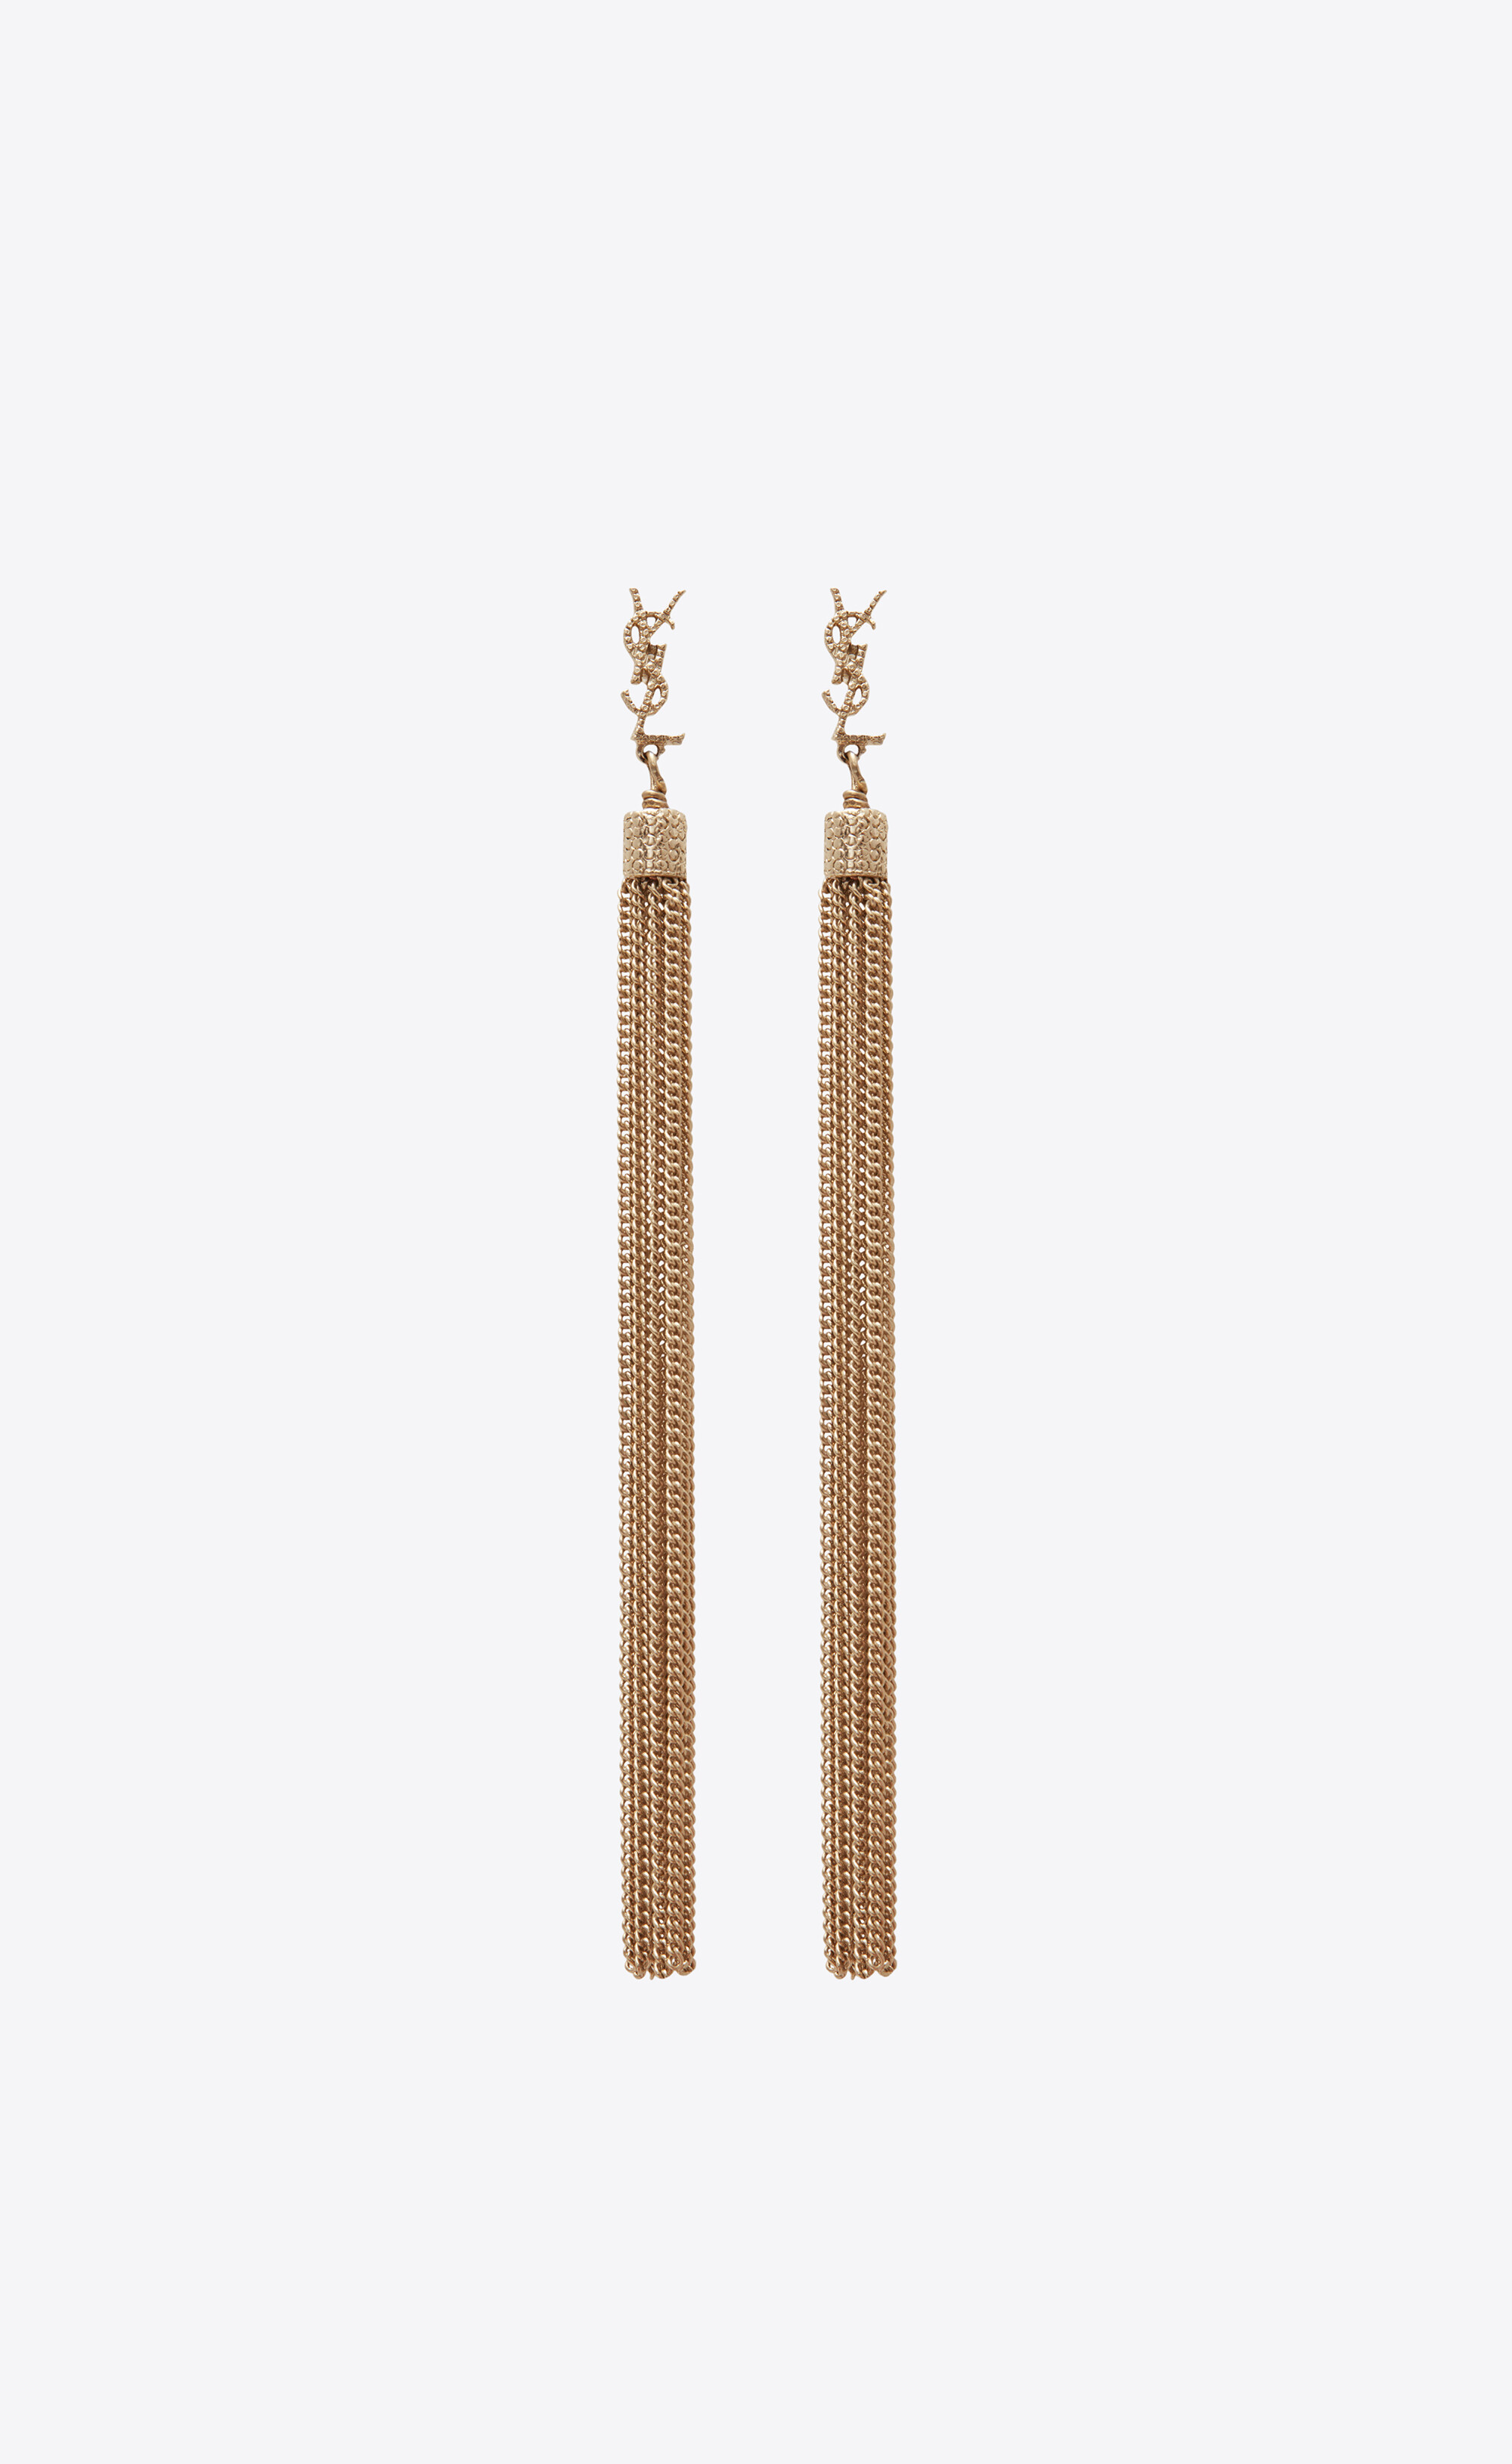 loulou earrings with chain tassels in light gold-colored brass